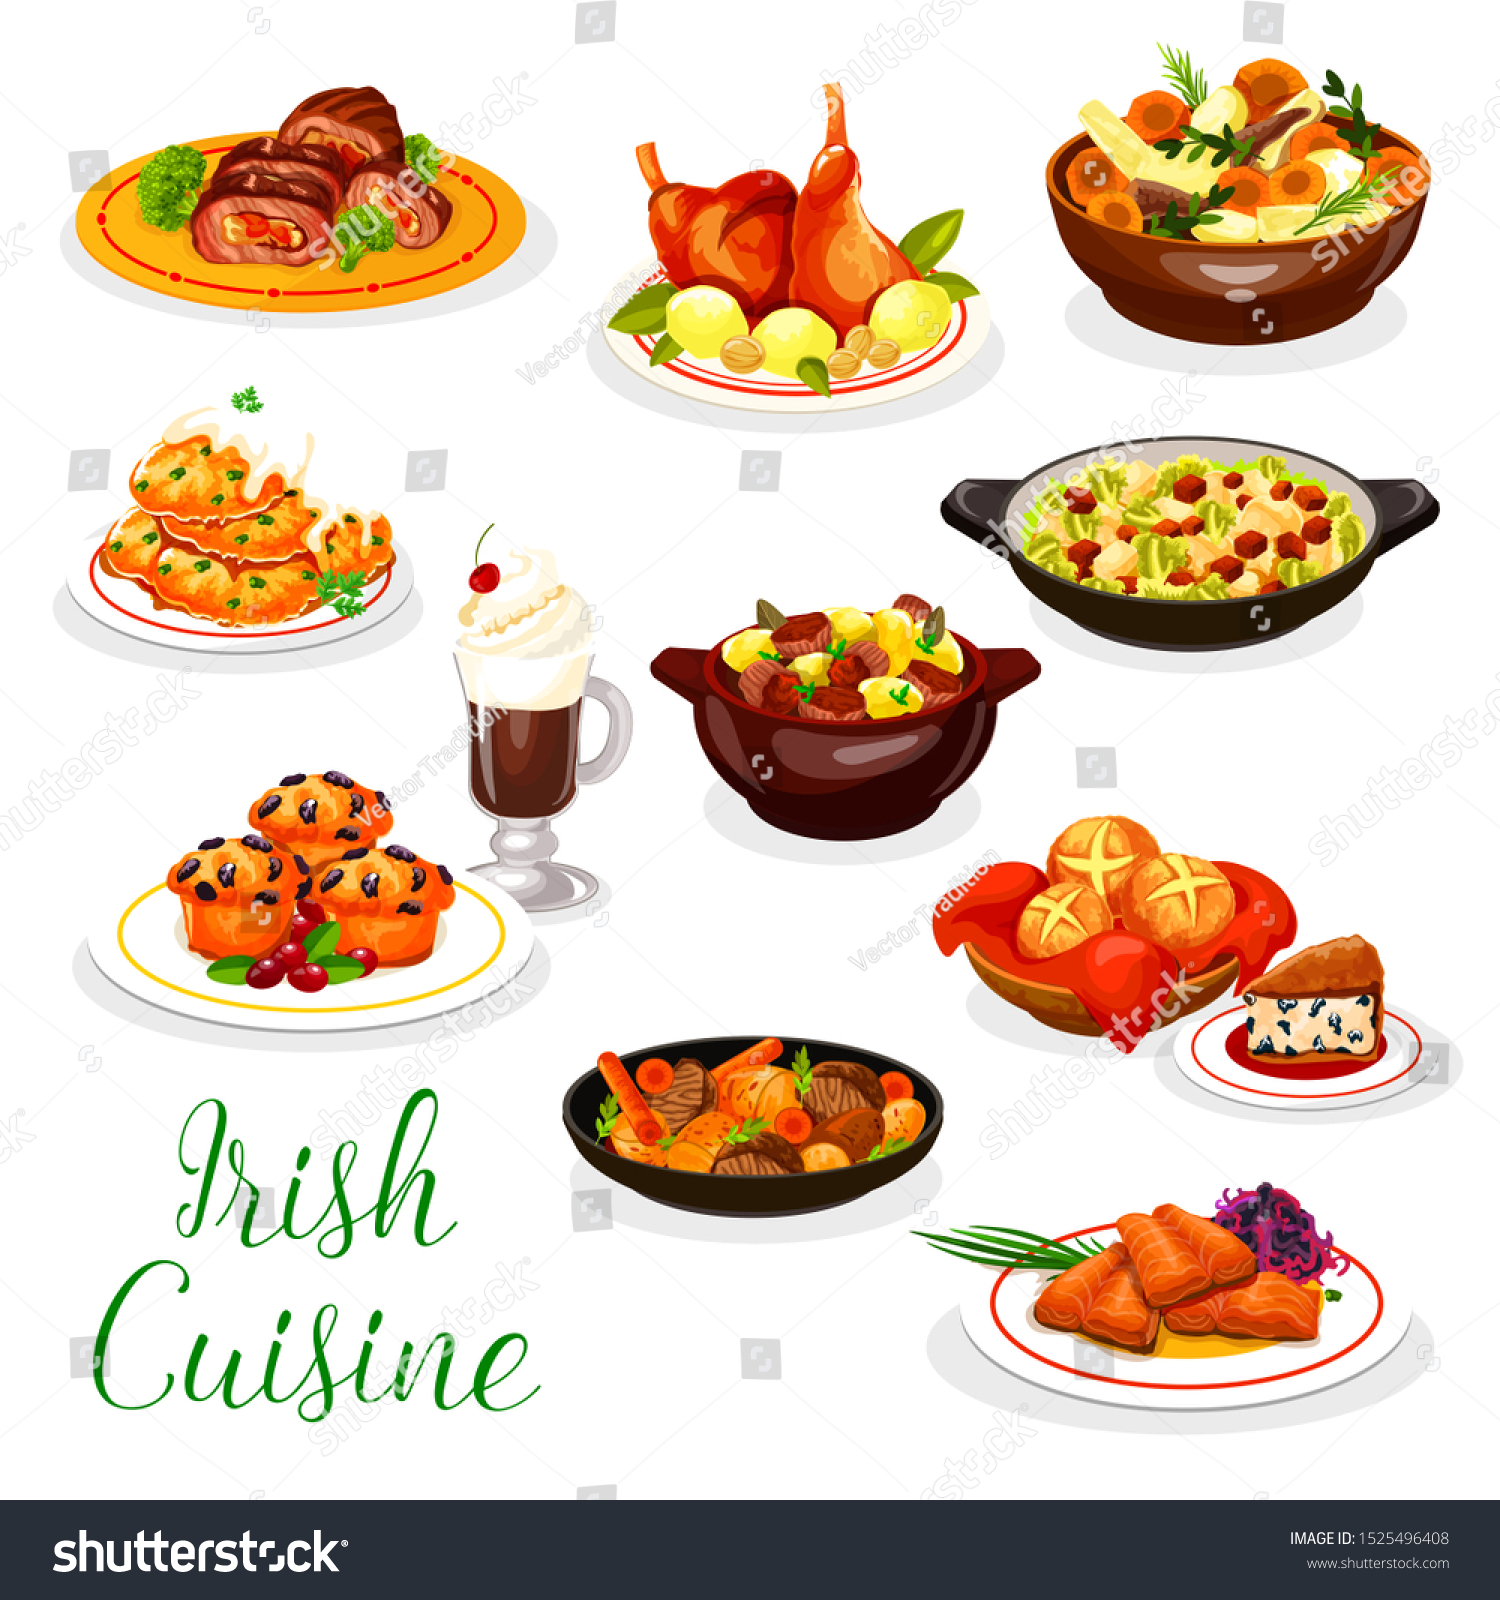 SVG of Cuisine of Ireland vector design with Irish coffee, meat and fish dishes. Vegetable stews with rabbit and lamb, baked salmon, potato pancake and red cabbage salad, beef roll, soda bread, berry cupcake svg